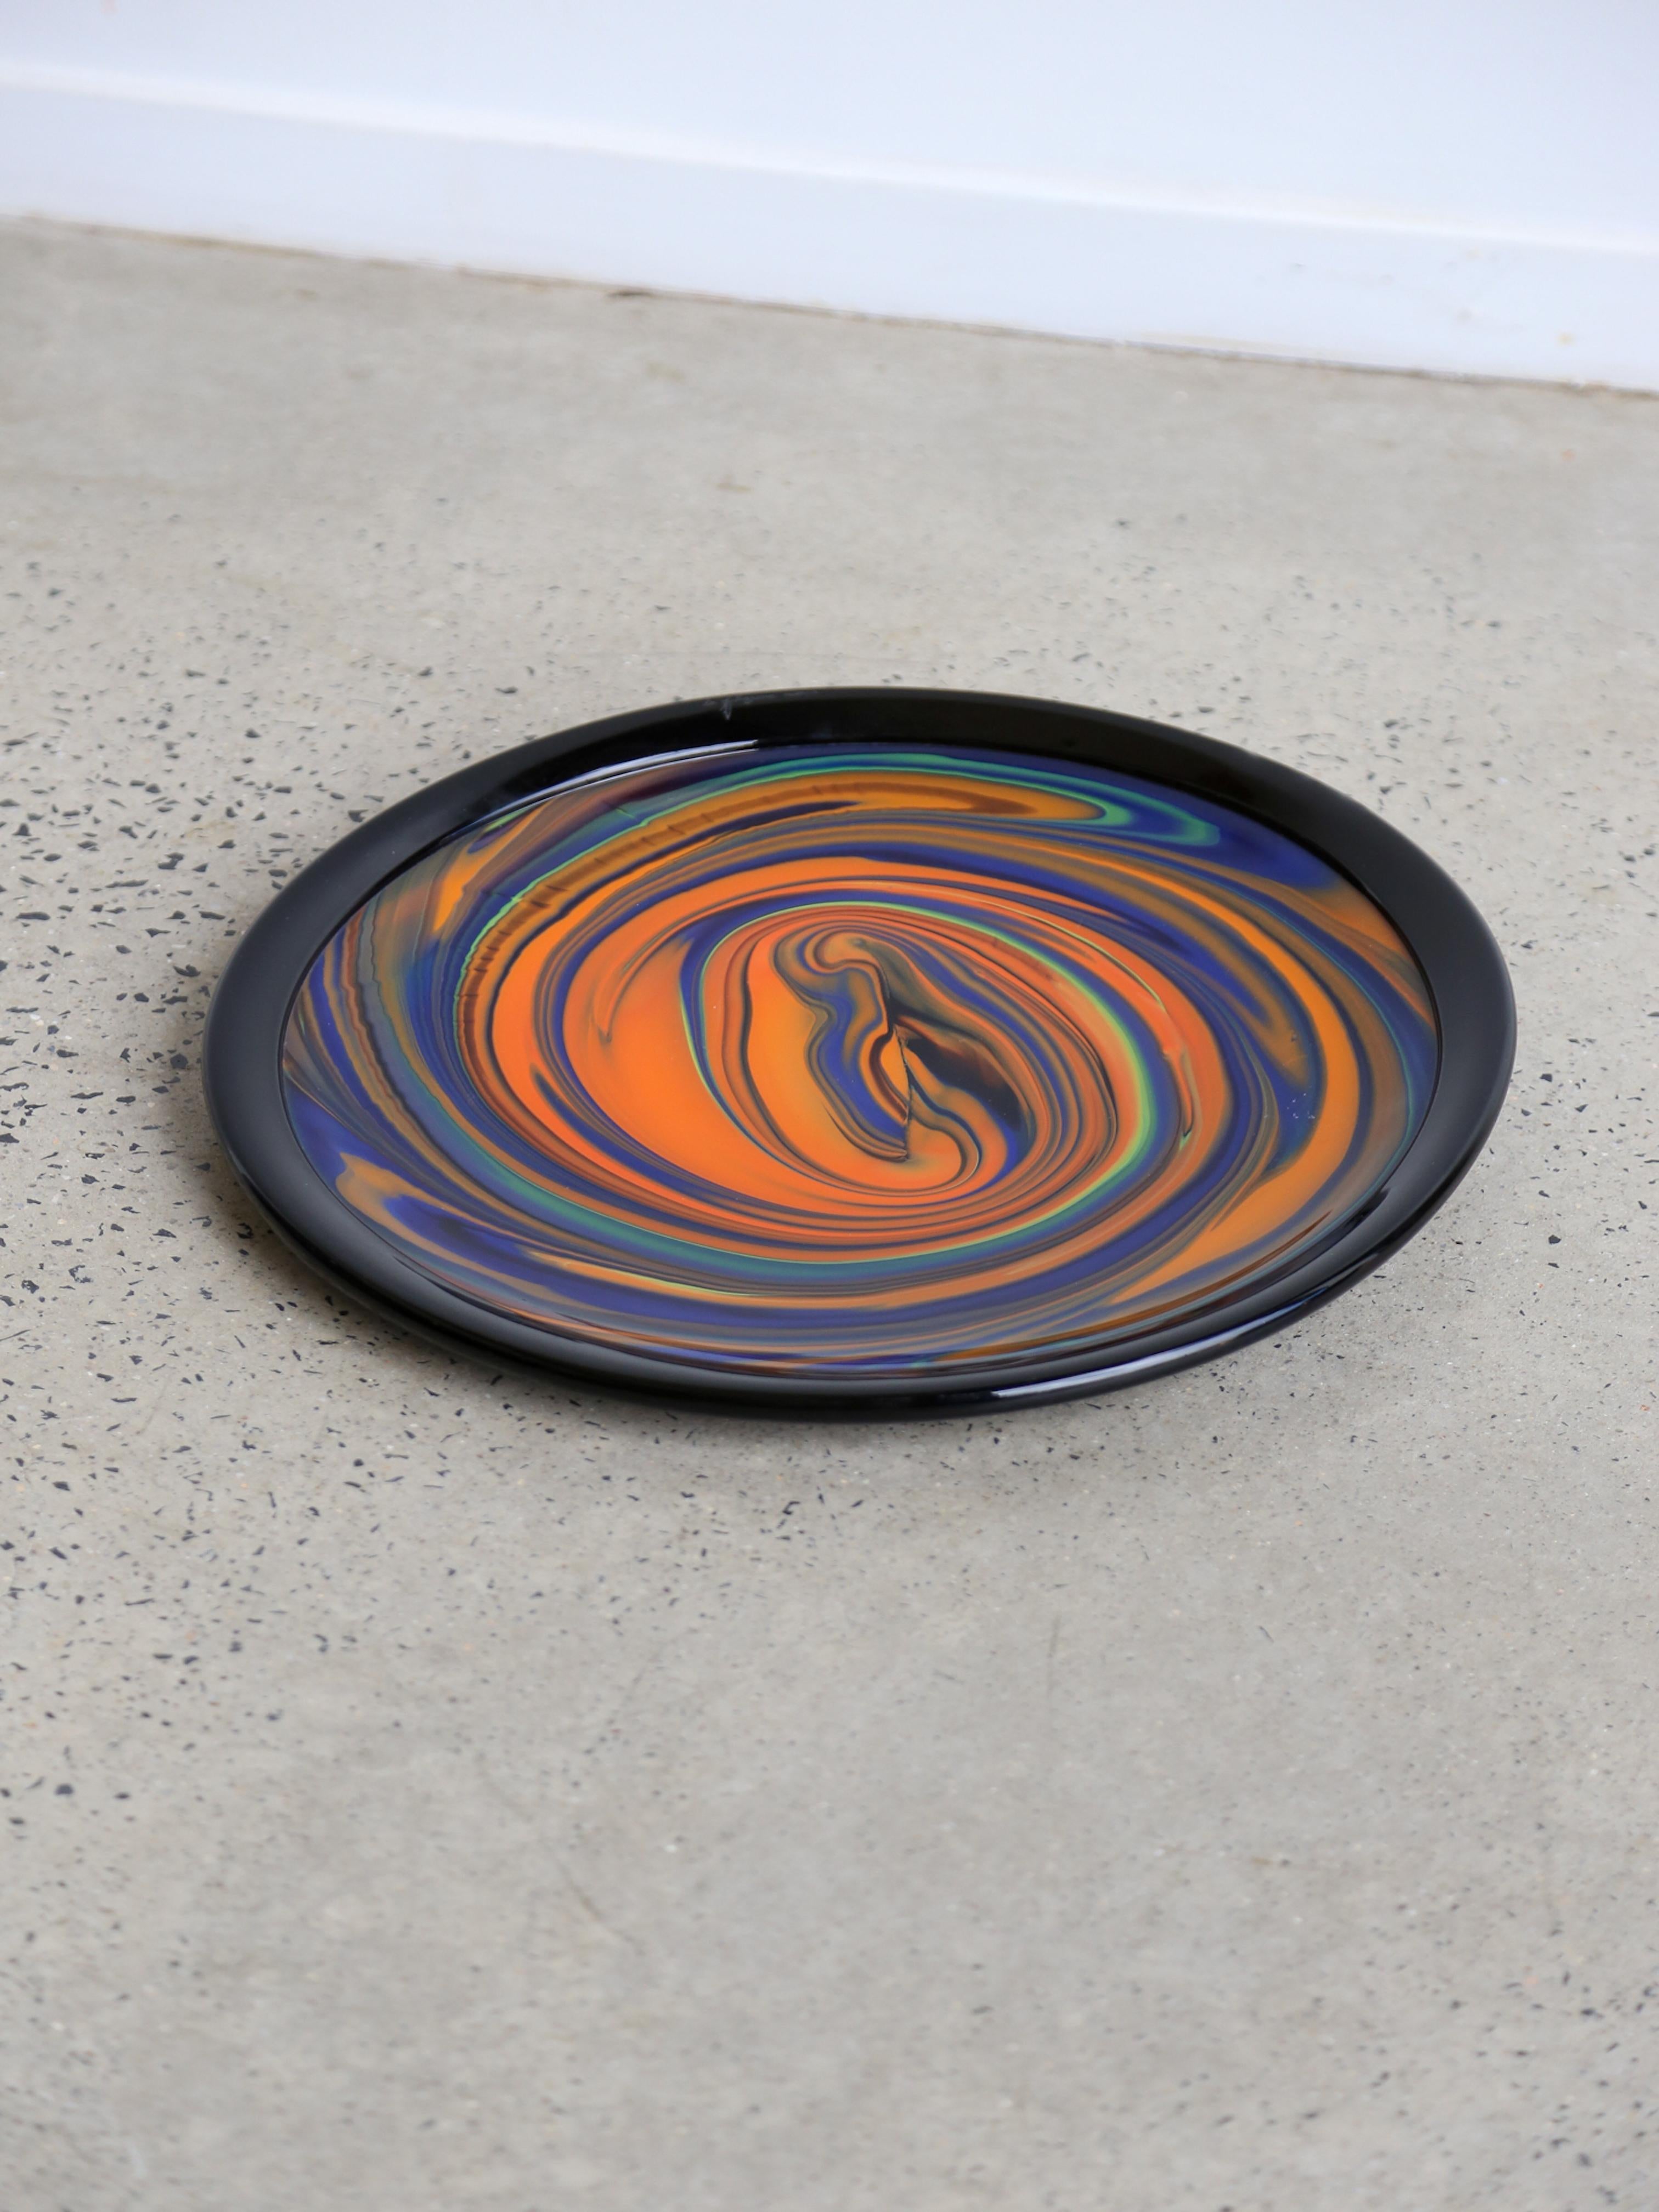 Large plate decorative object centrepiece or empty pockets model Mercucio 1104 designed by Missoni and produced in the 1980s by the Italian company Arte Vetro Murano. The object was made by hand in polychrome and black overlaid Murano glass with